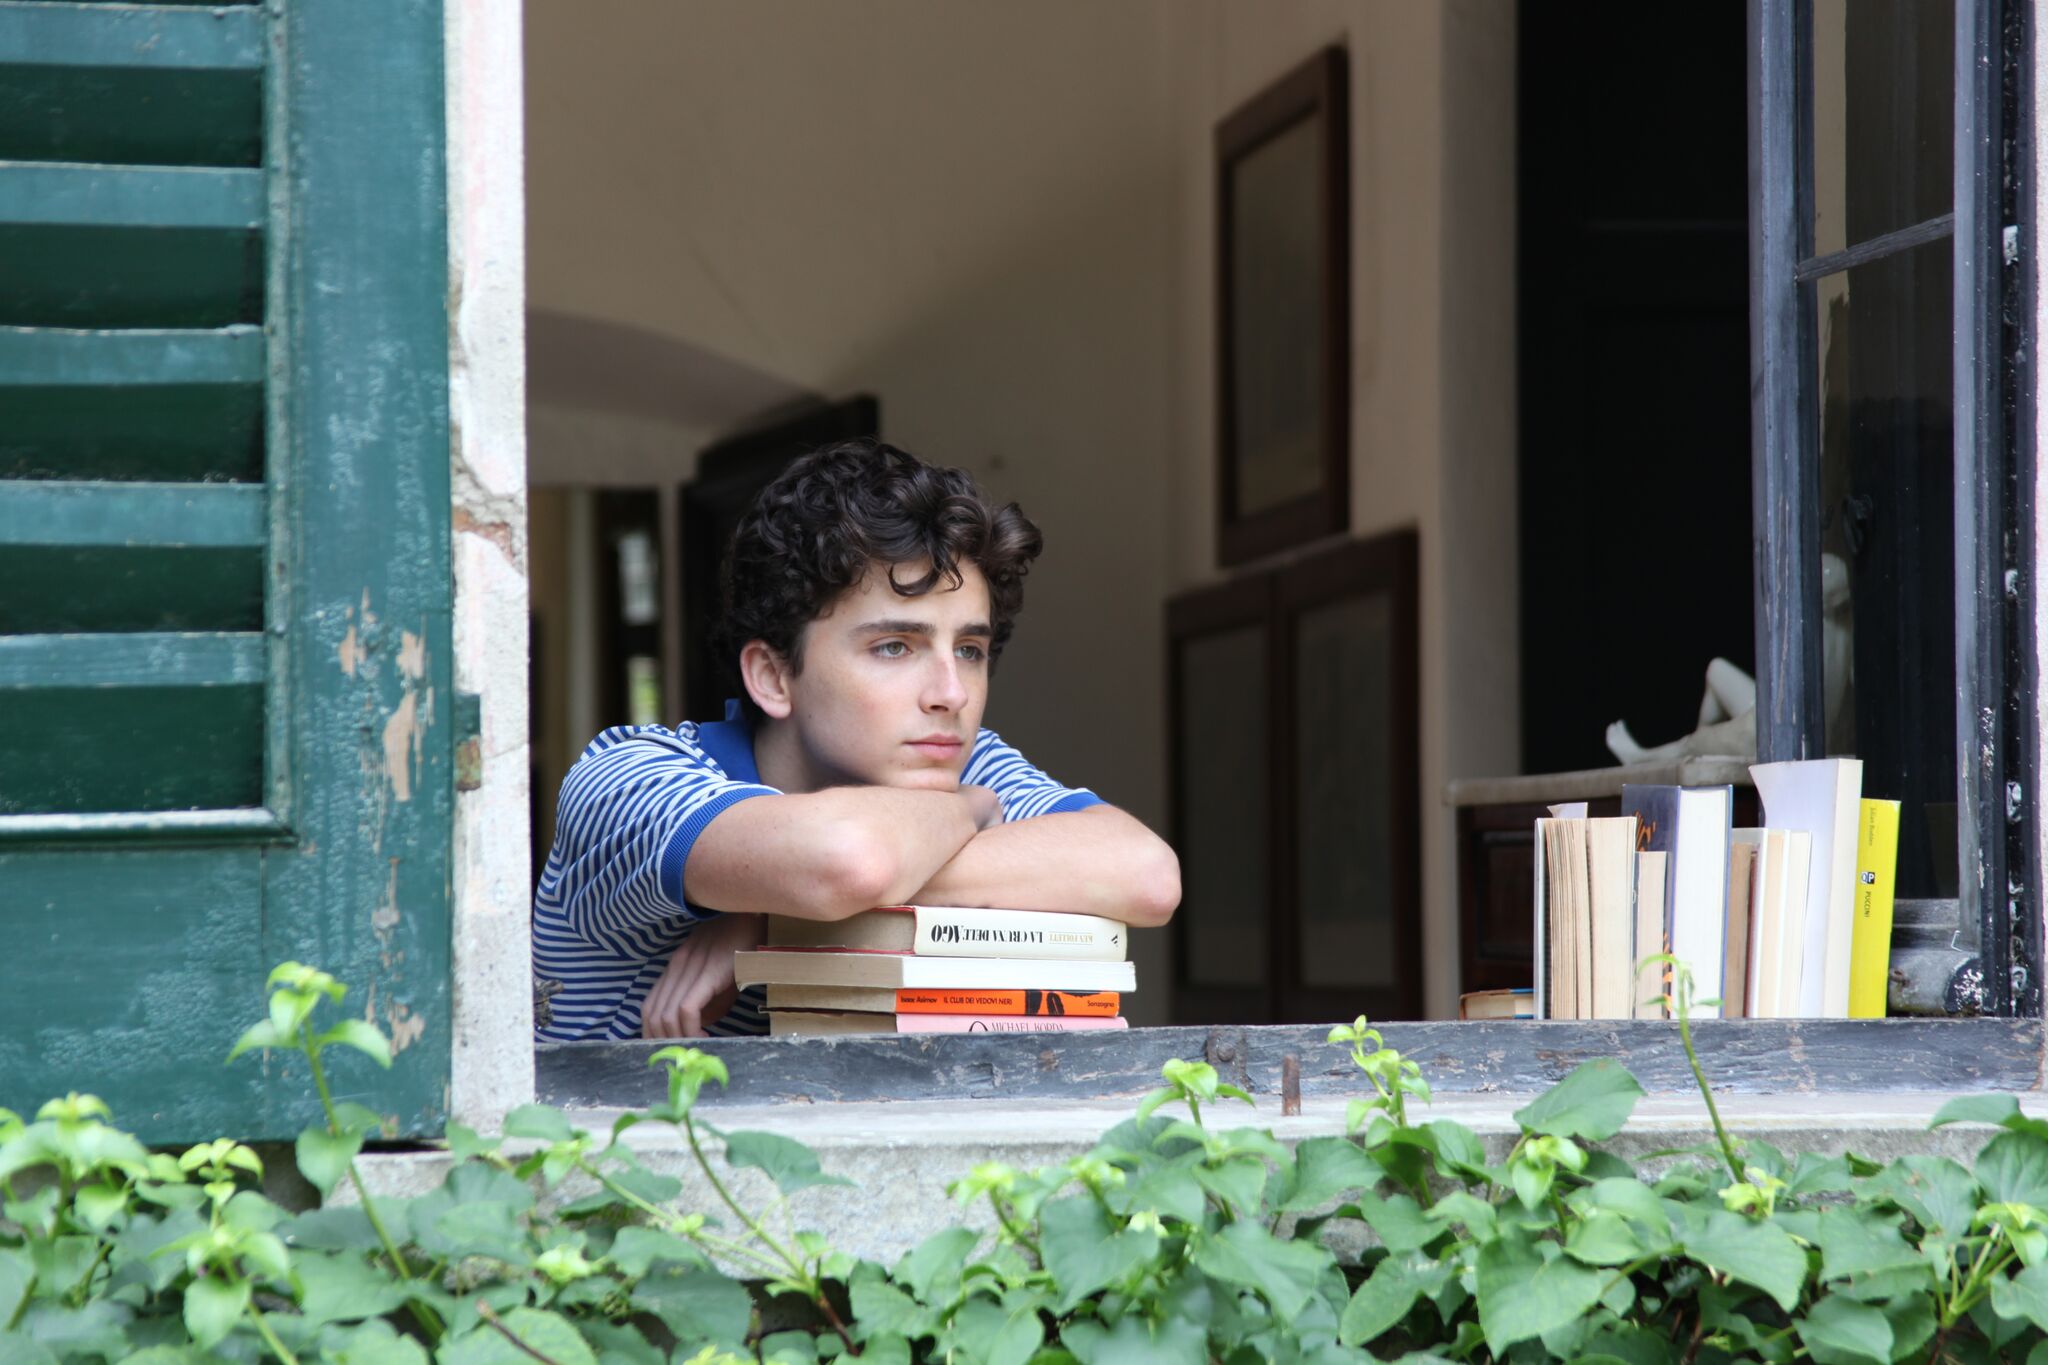 Call Me By Your Name (VIFF Review)